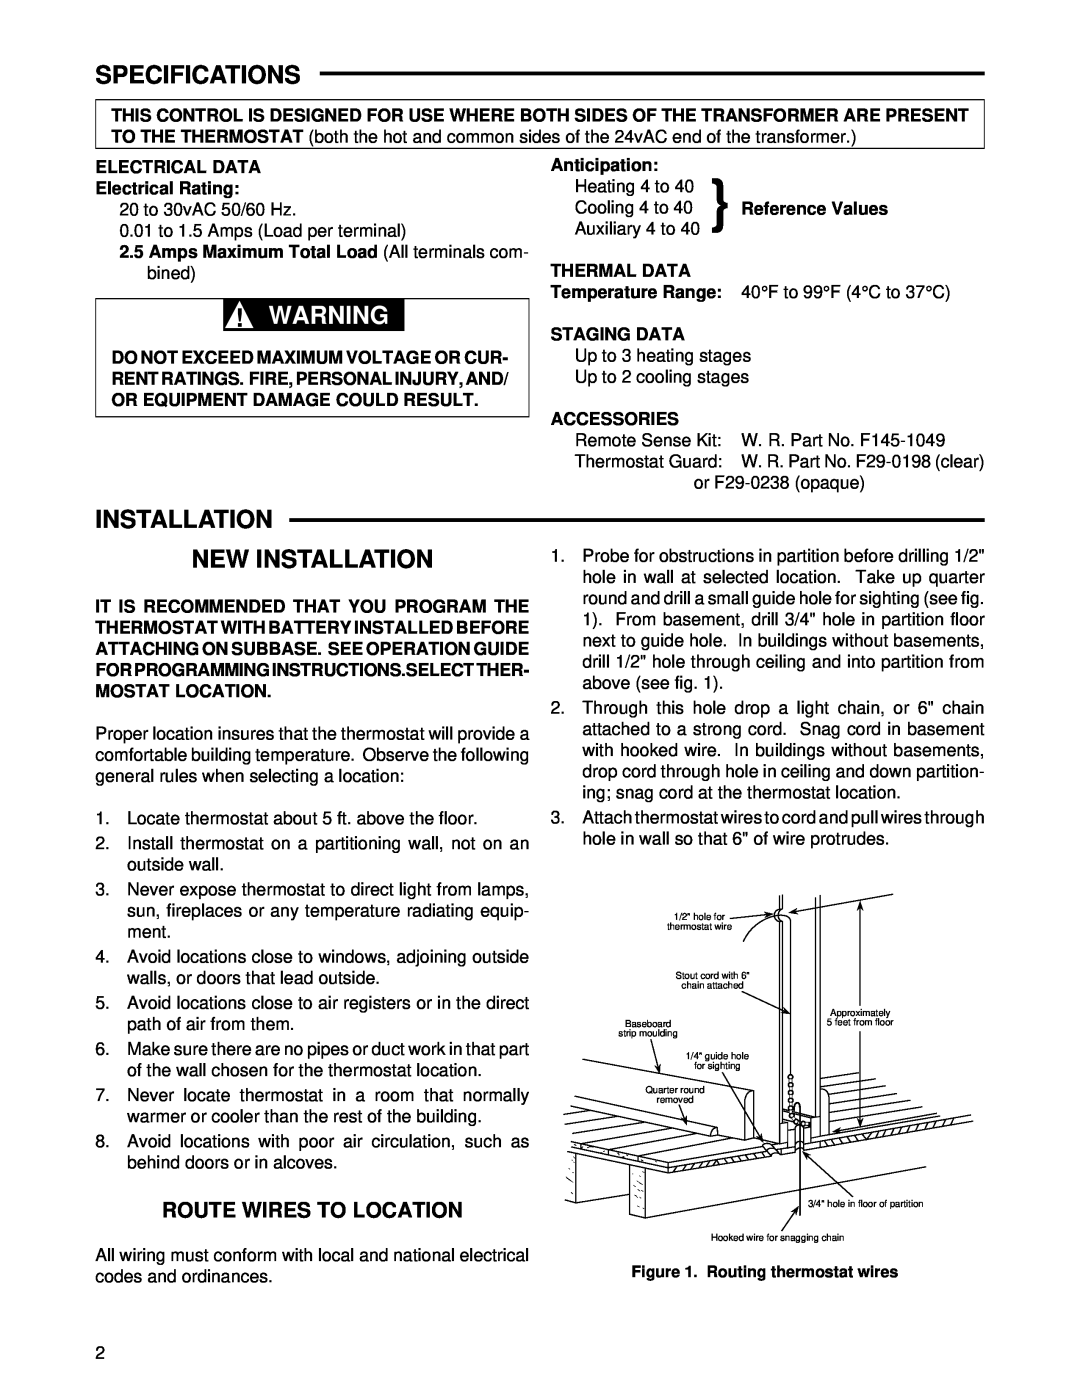 White Rodgers 1F92-71 installation instructions Specifications, Installation New Installation, Route Wires To Location 